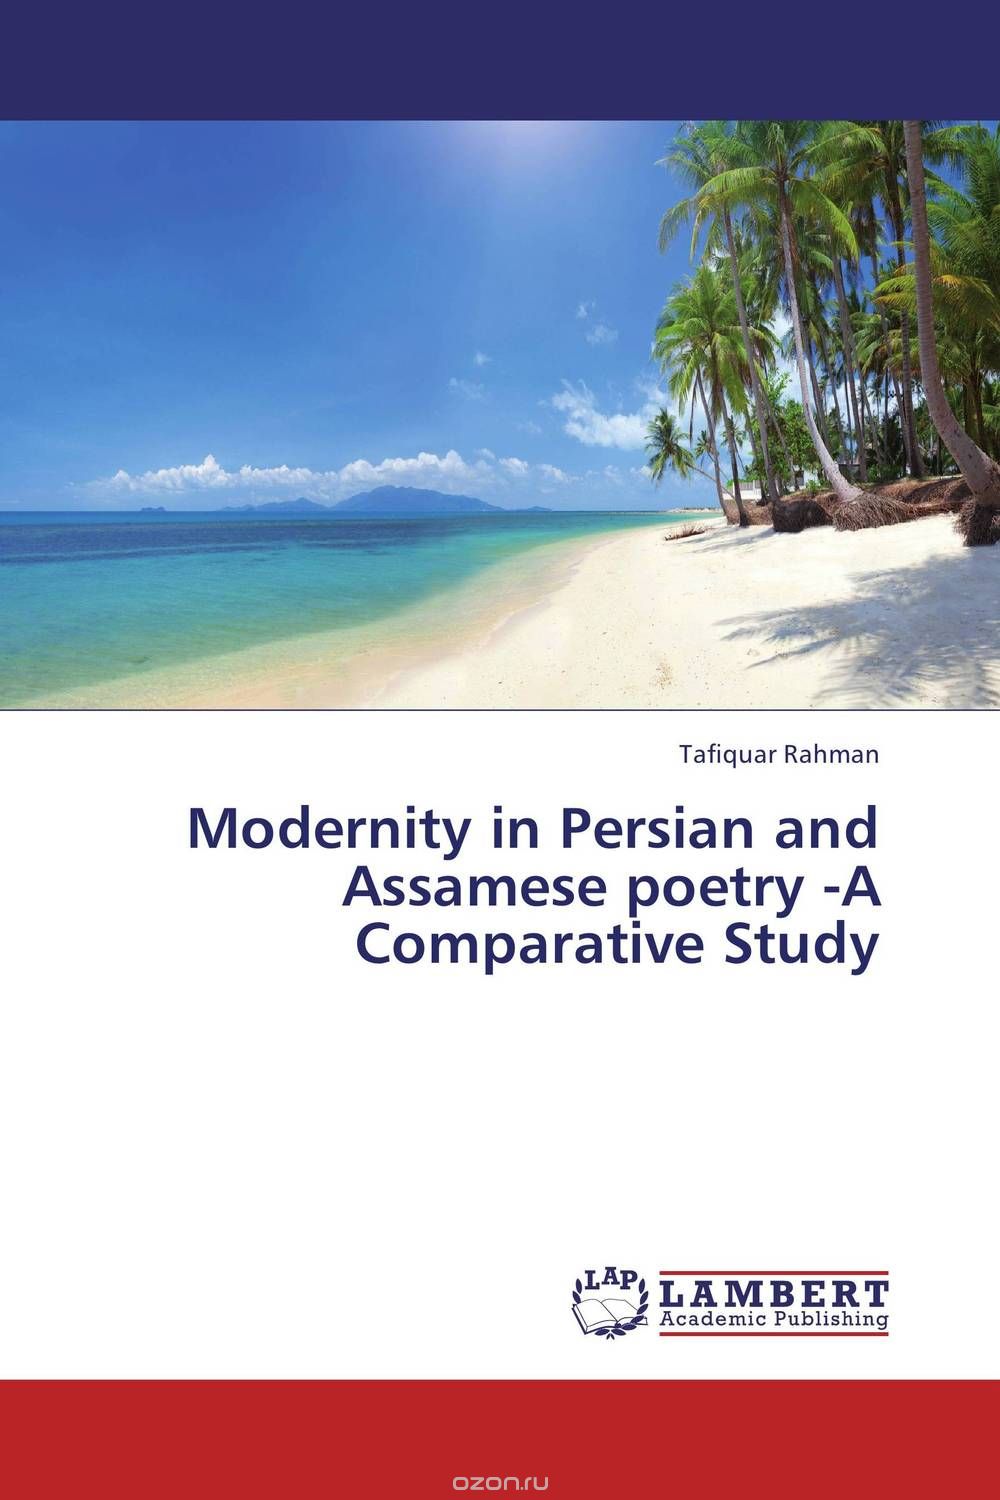 Скачать книгу "Modernity in Persian and Assamese poetry -A Comparative Study"